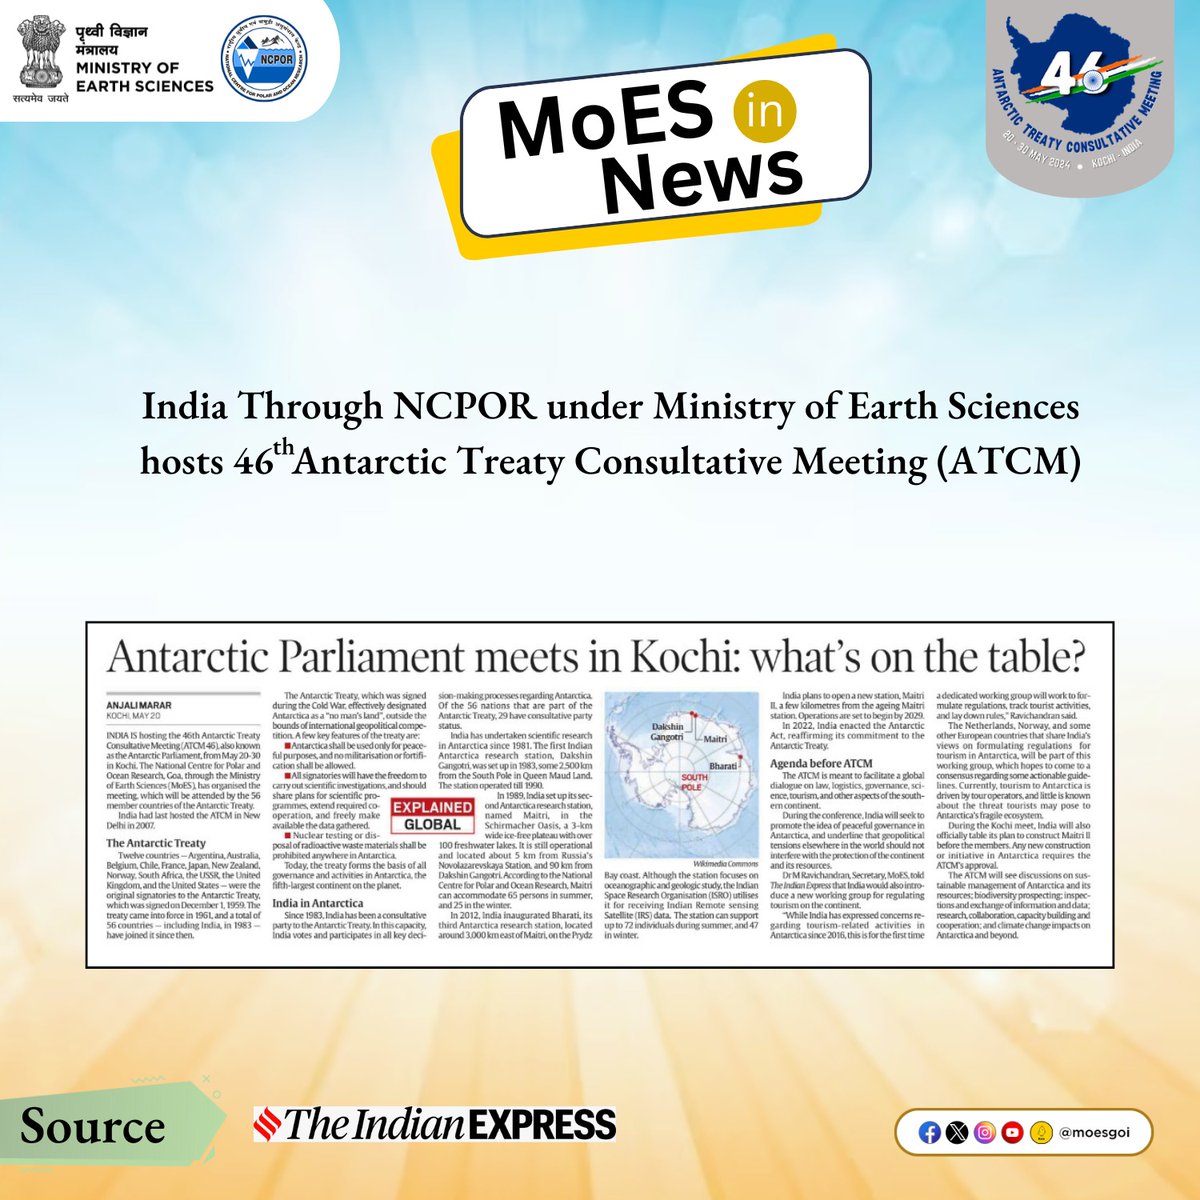 #MoESInNews
Construction of Maitri 2 is among the prime topics to be tabled by India during the 46th Antarctic Treaty Consultative Meeting.  
Read more about it here: indianexpress.com/article/explai…